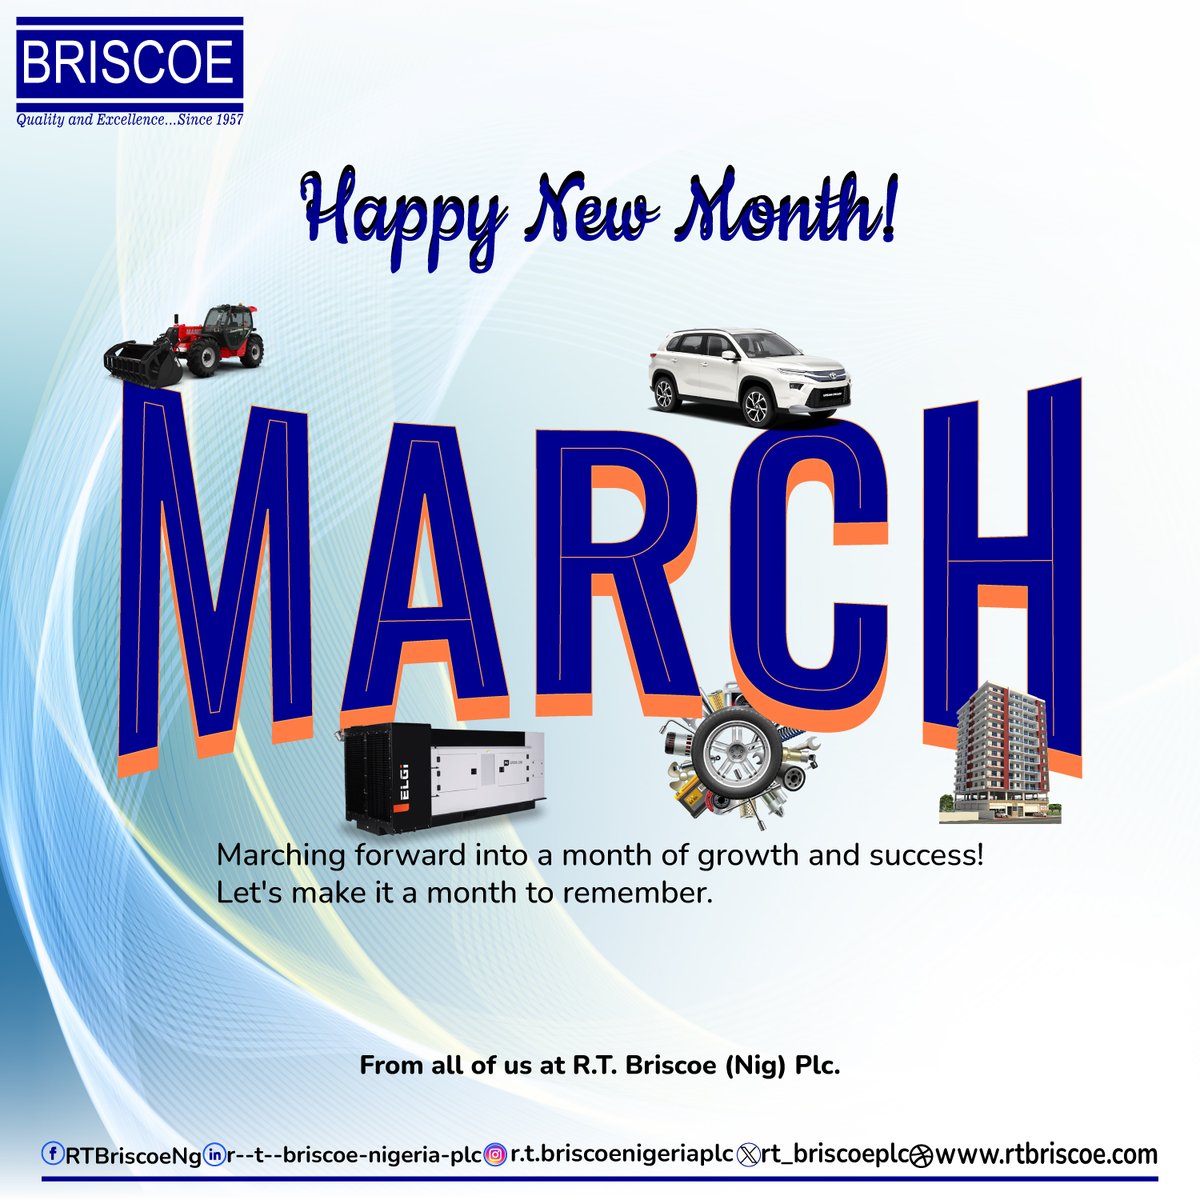 Marching forward into a month of growth and success!

Let's Make it a month to remember.

#newmonth #march #3rd #products #rtbriscoenigeriaplc